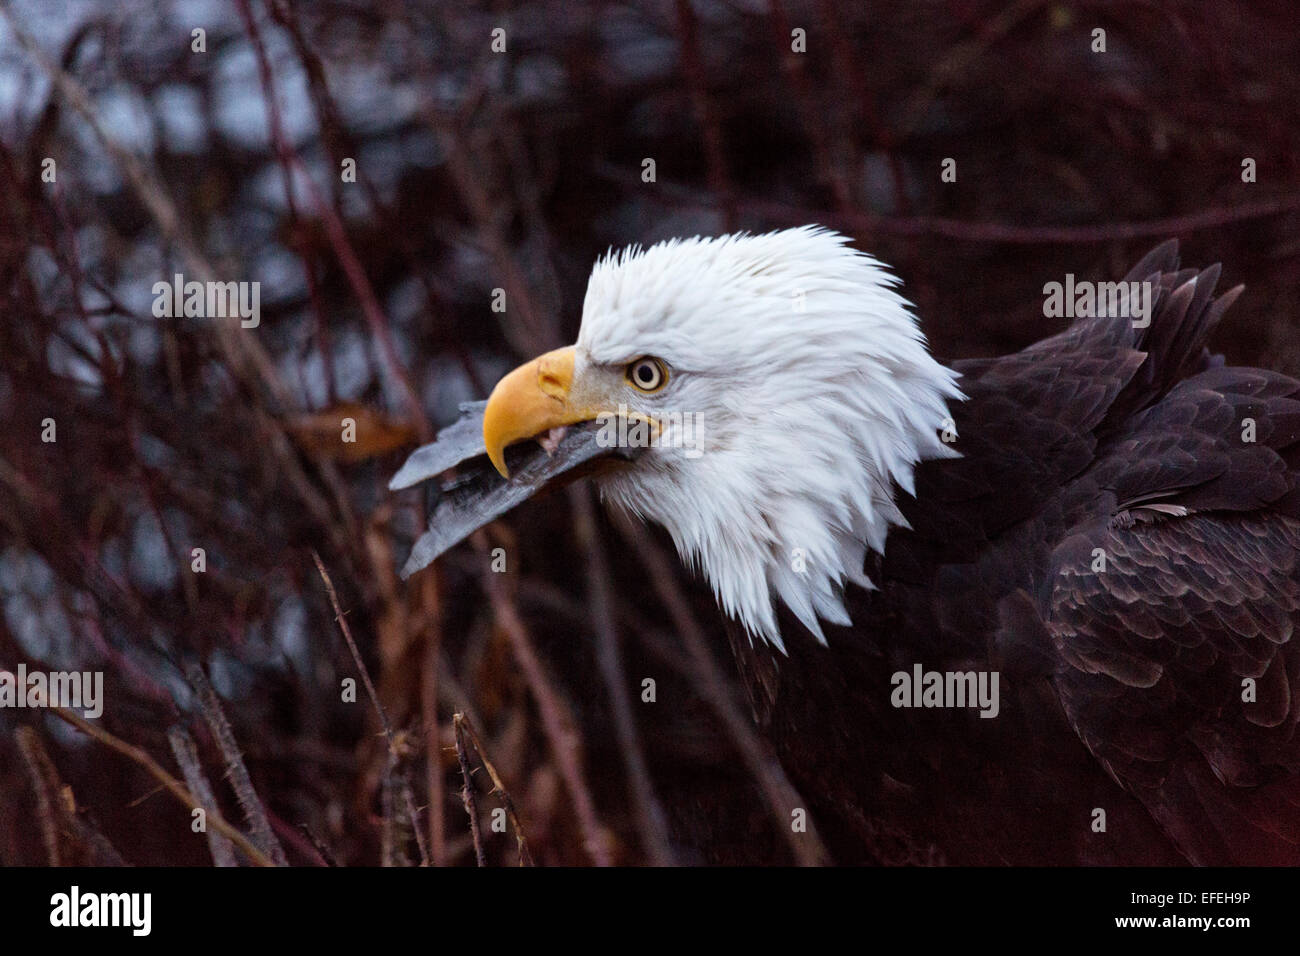 Wild bald eagle gulps fish, tail in its beak, on the banks of the Chilkat River in Haines, Alaska. Stock Photo